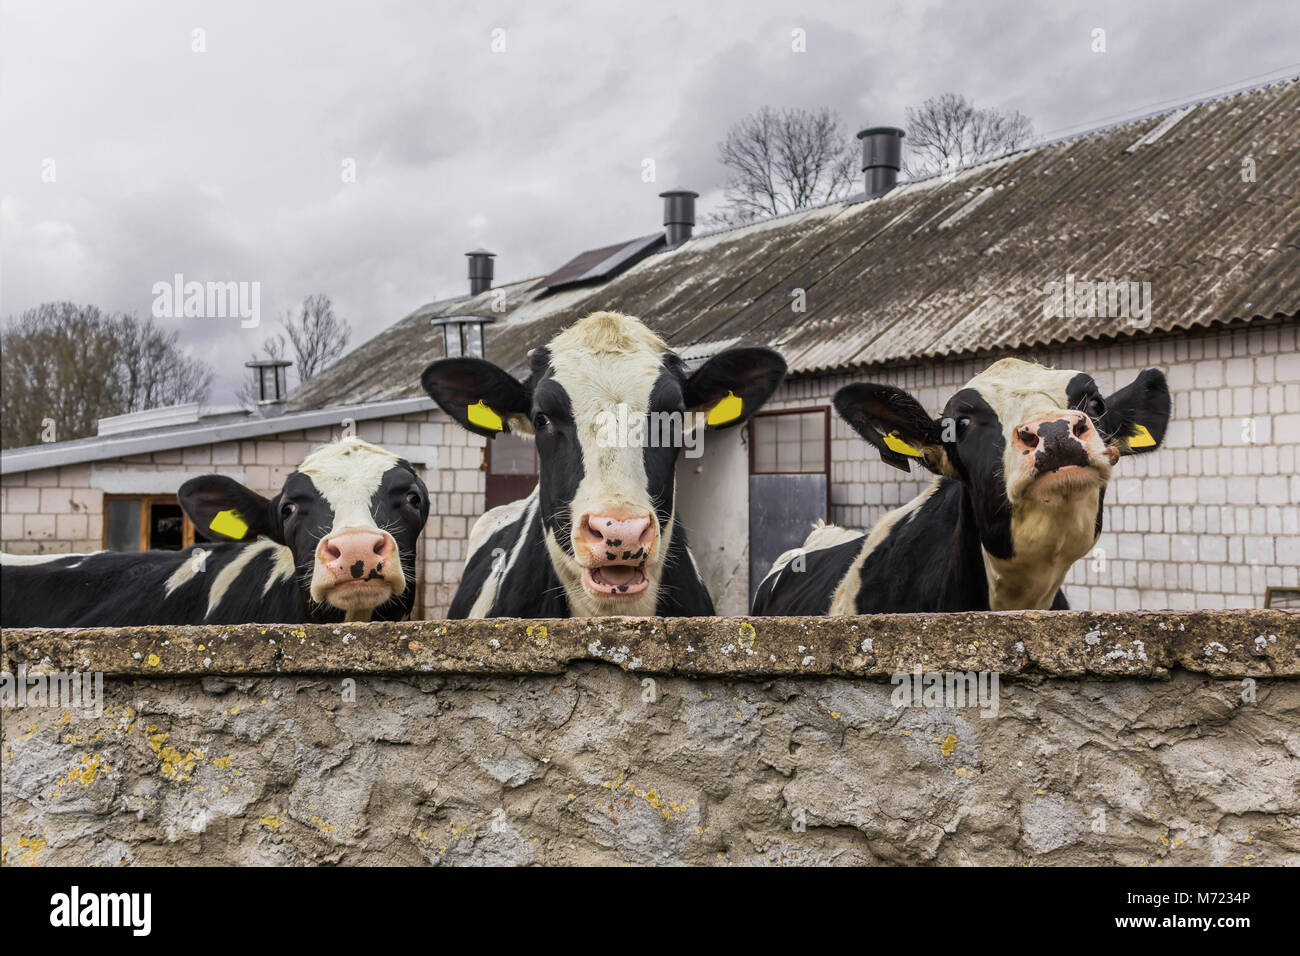 Three heifers, with yellow identification tags in their ears,what  standing behind the stone wall. Dairy farm in Podlasie, Poland. Stock Photo